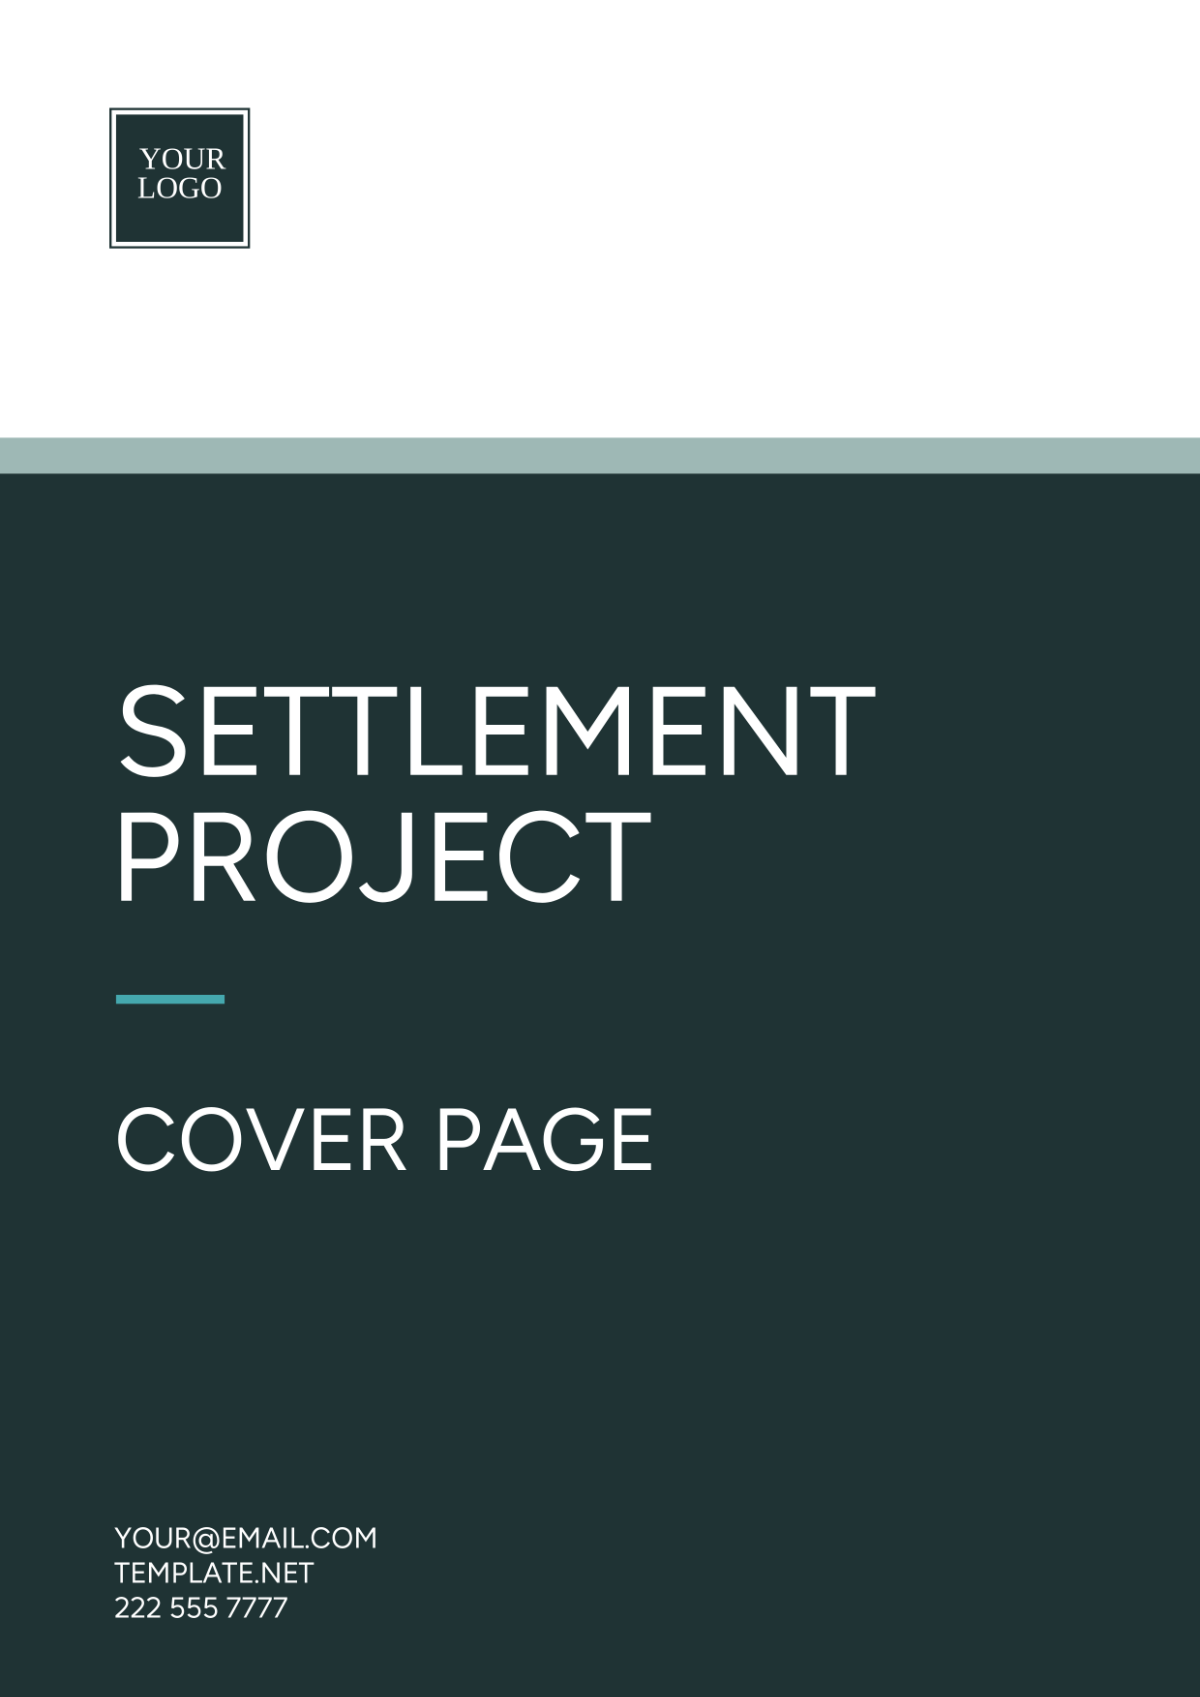 Settlement Project Cover Page Template